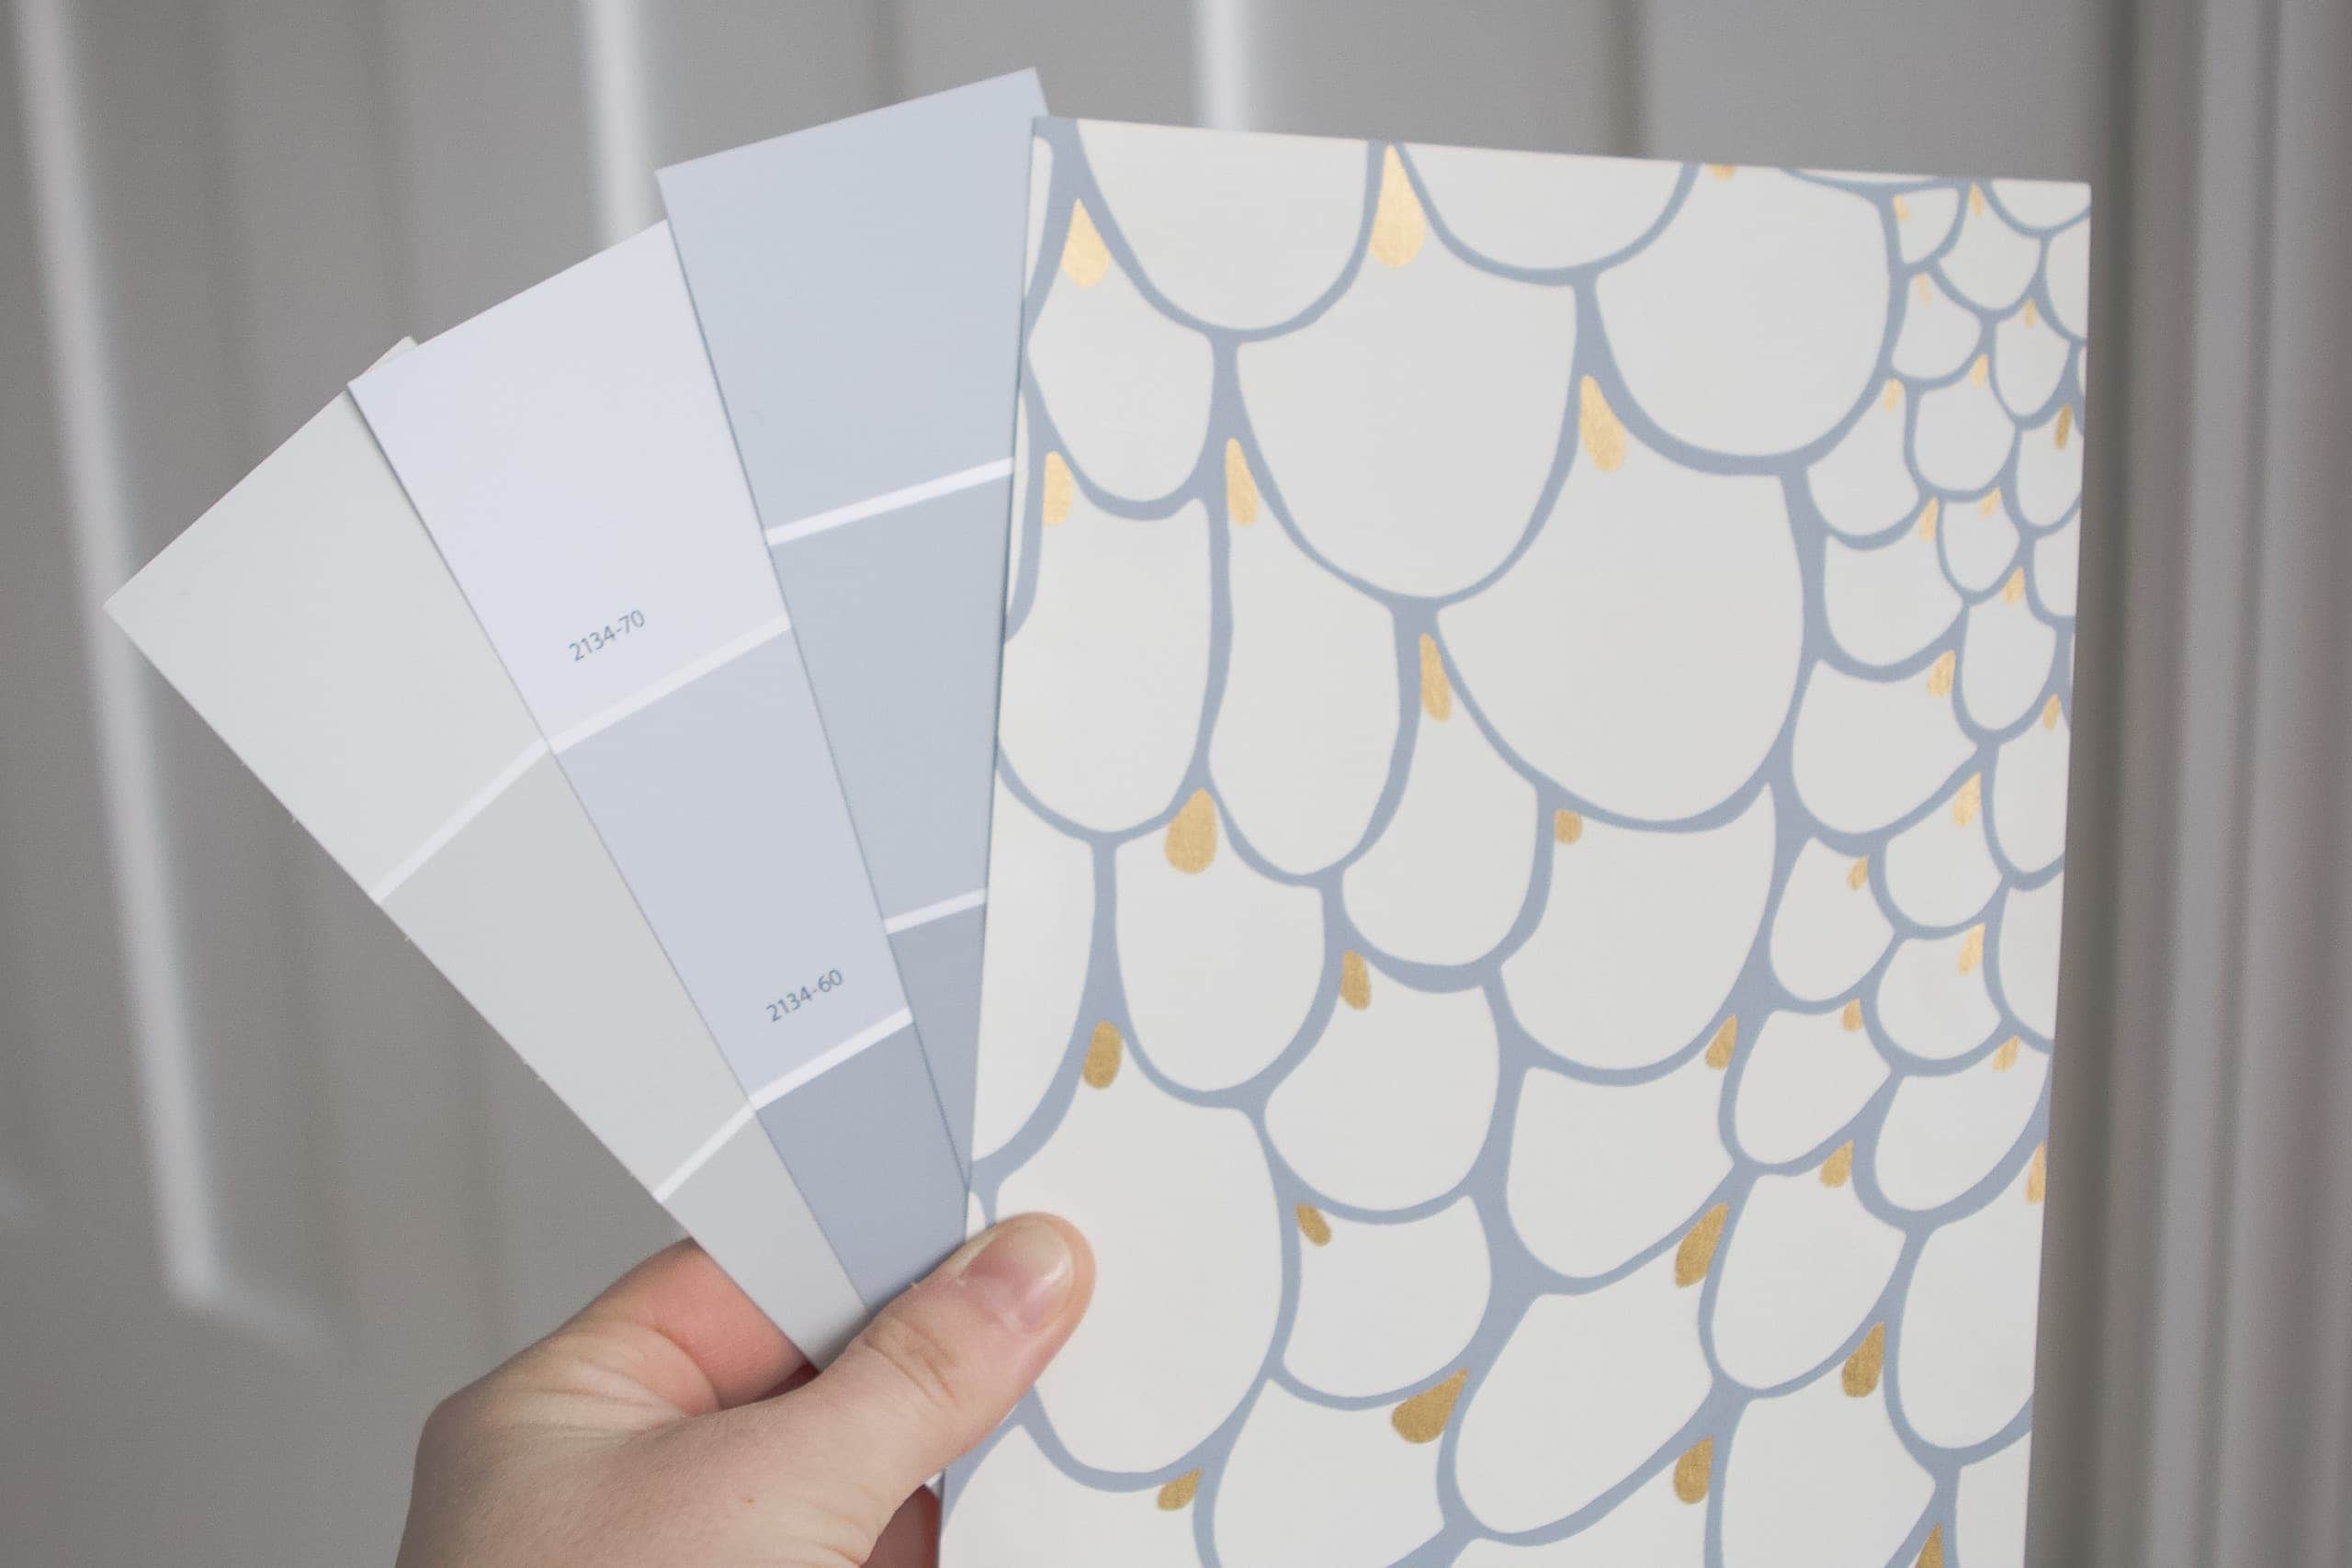 Putting the blue gray paint samples next to the wall paper